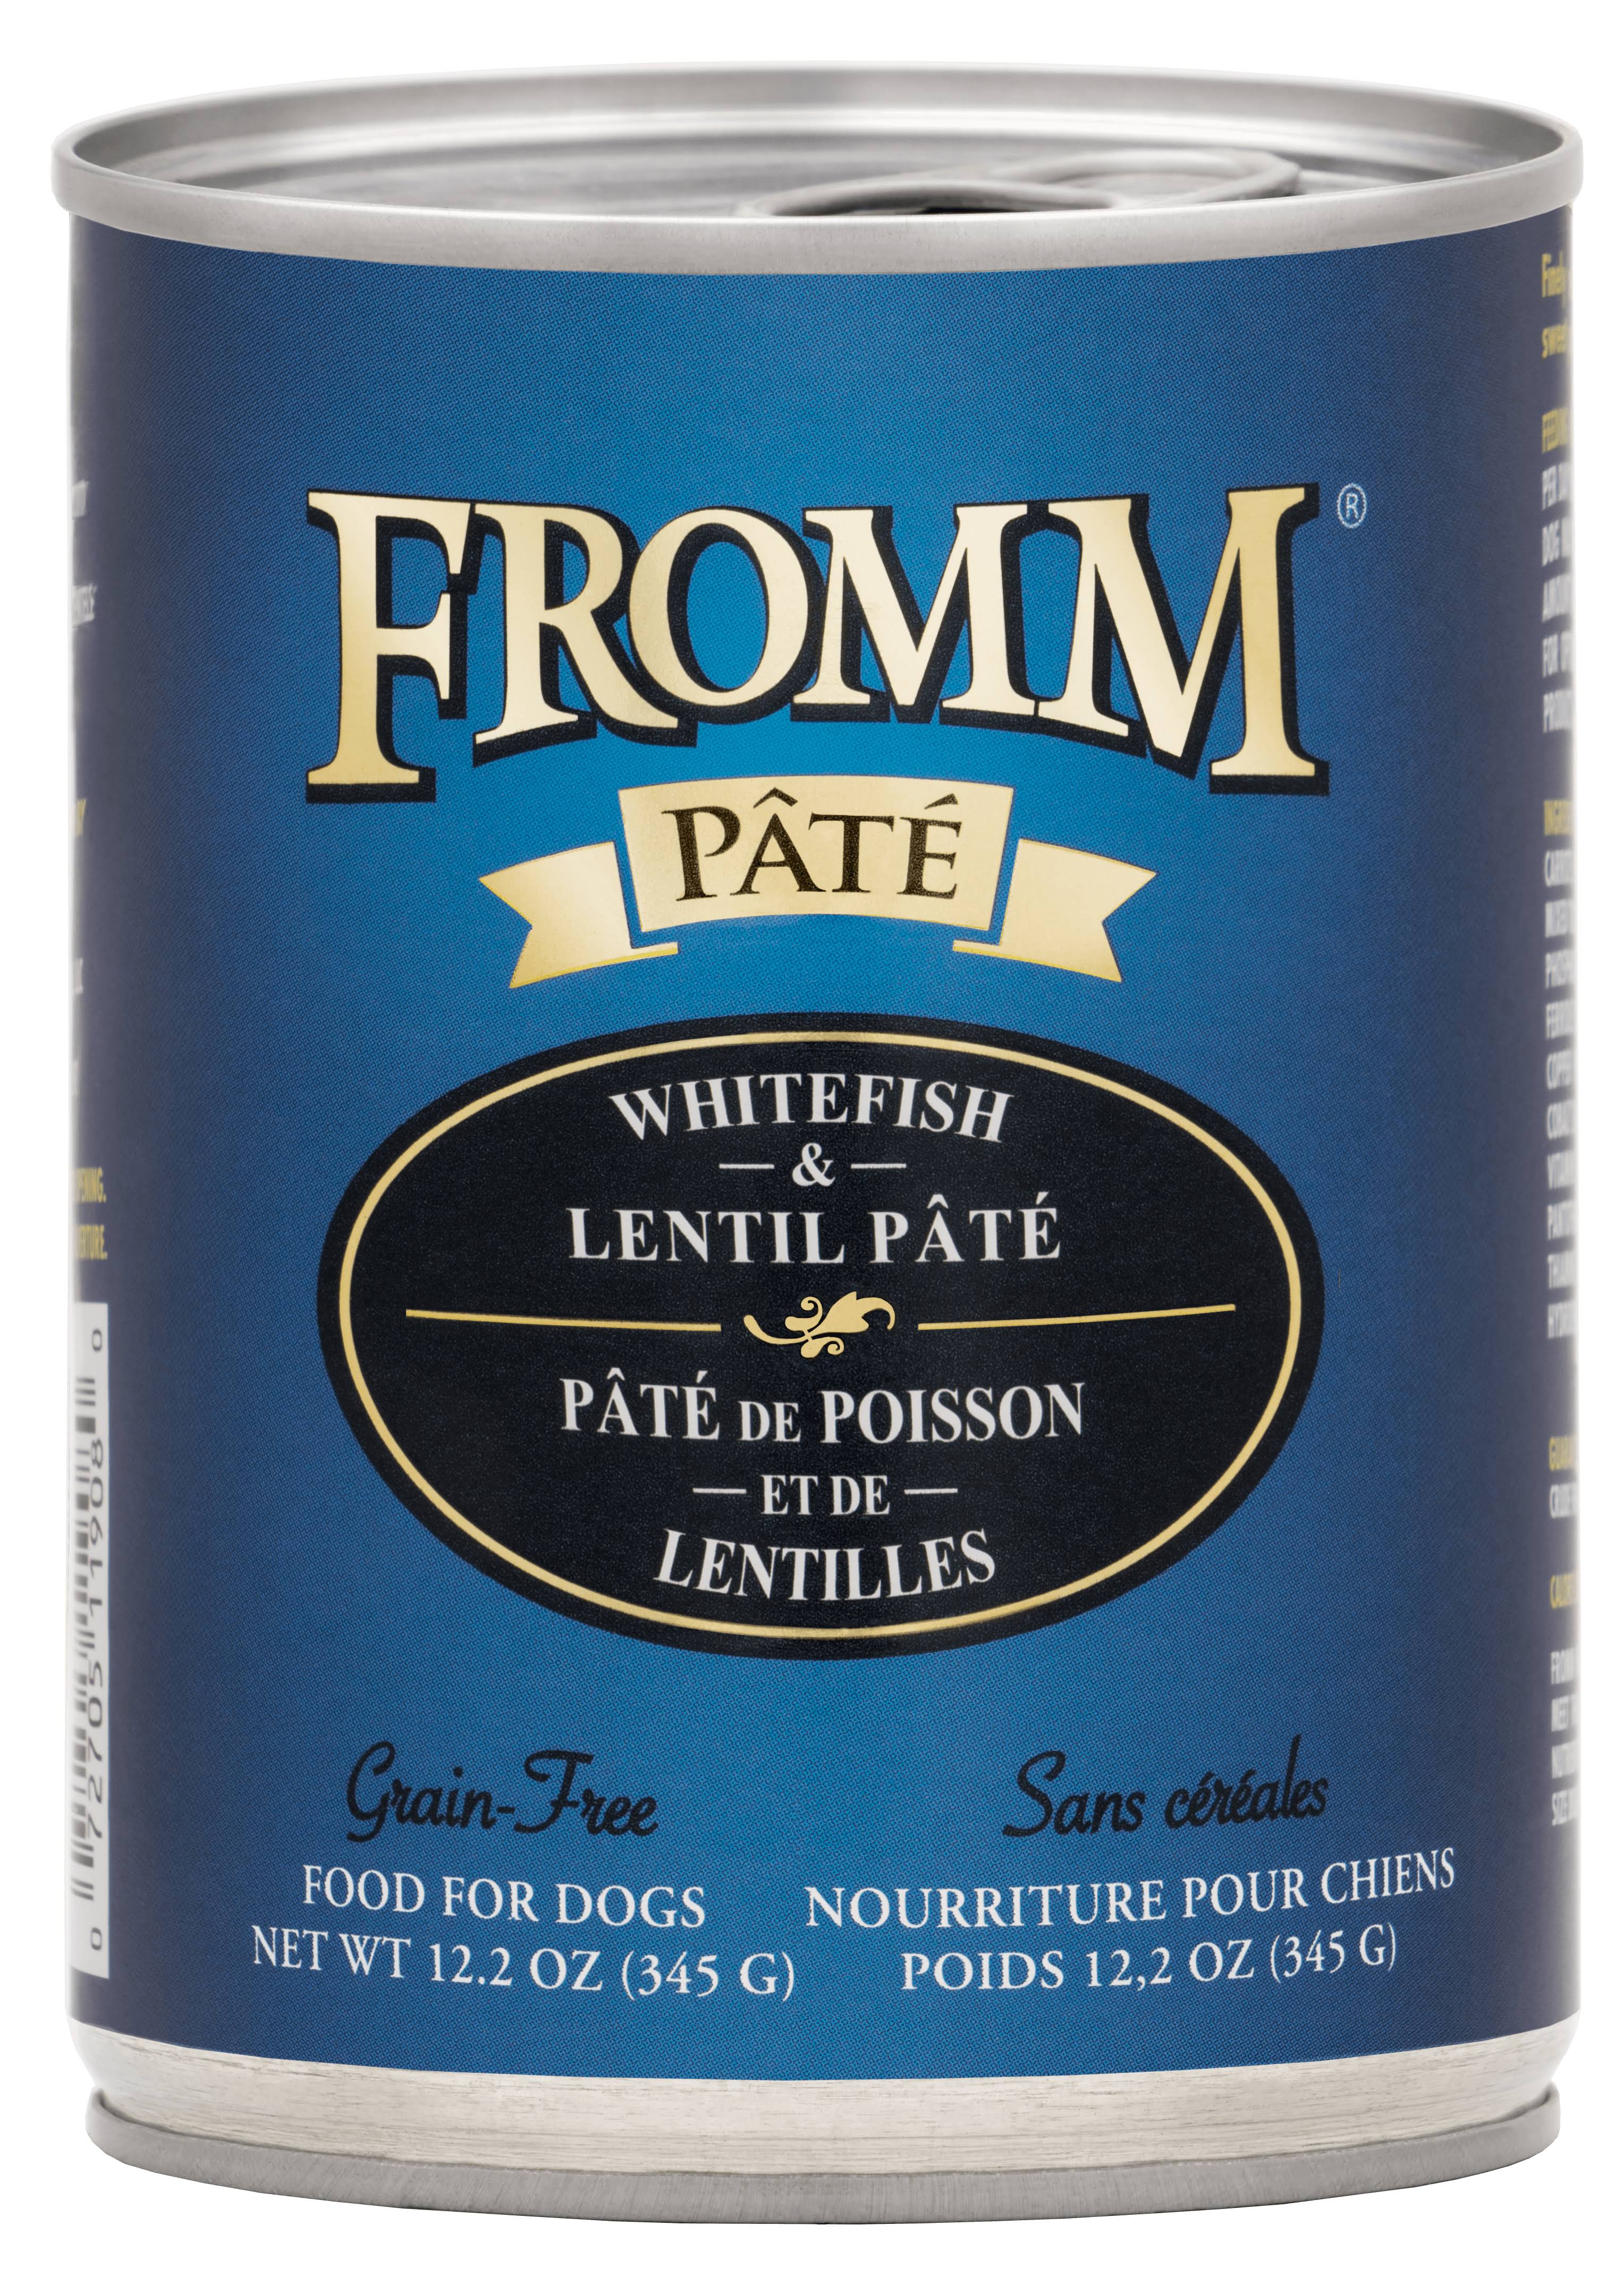 Fromm Grain Free Whitefish & Lentil Pate Canned Dog Food - 12.2 oz, Case of 12